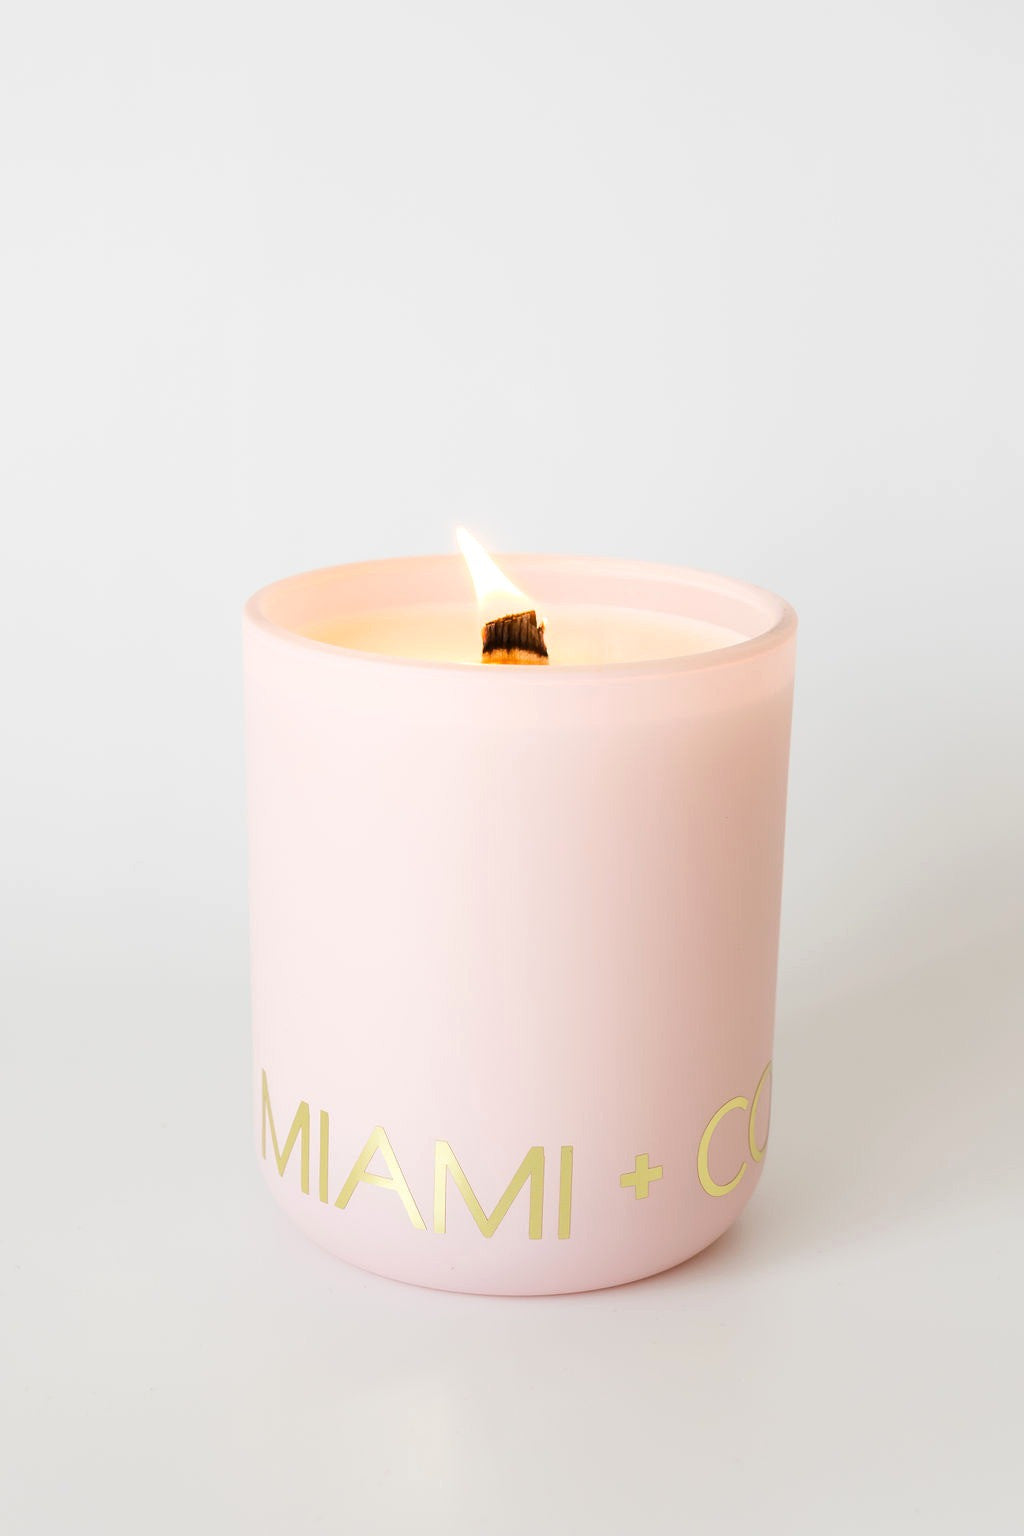 Miami Vice - Large Candle